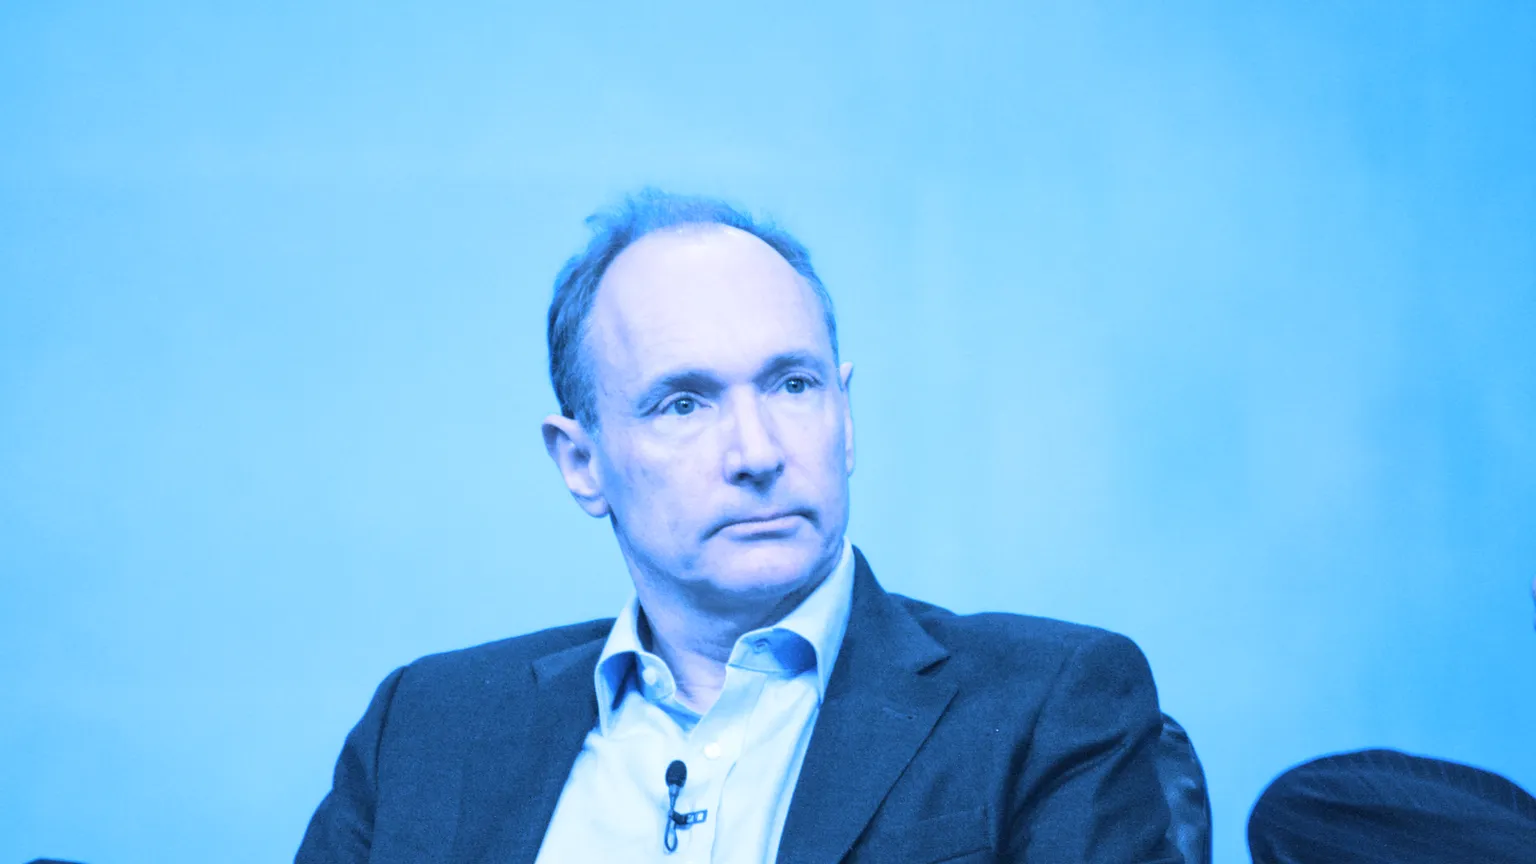 Tim Berners-Lee invented the Internet. Image: Shutterstock